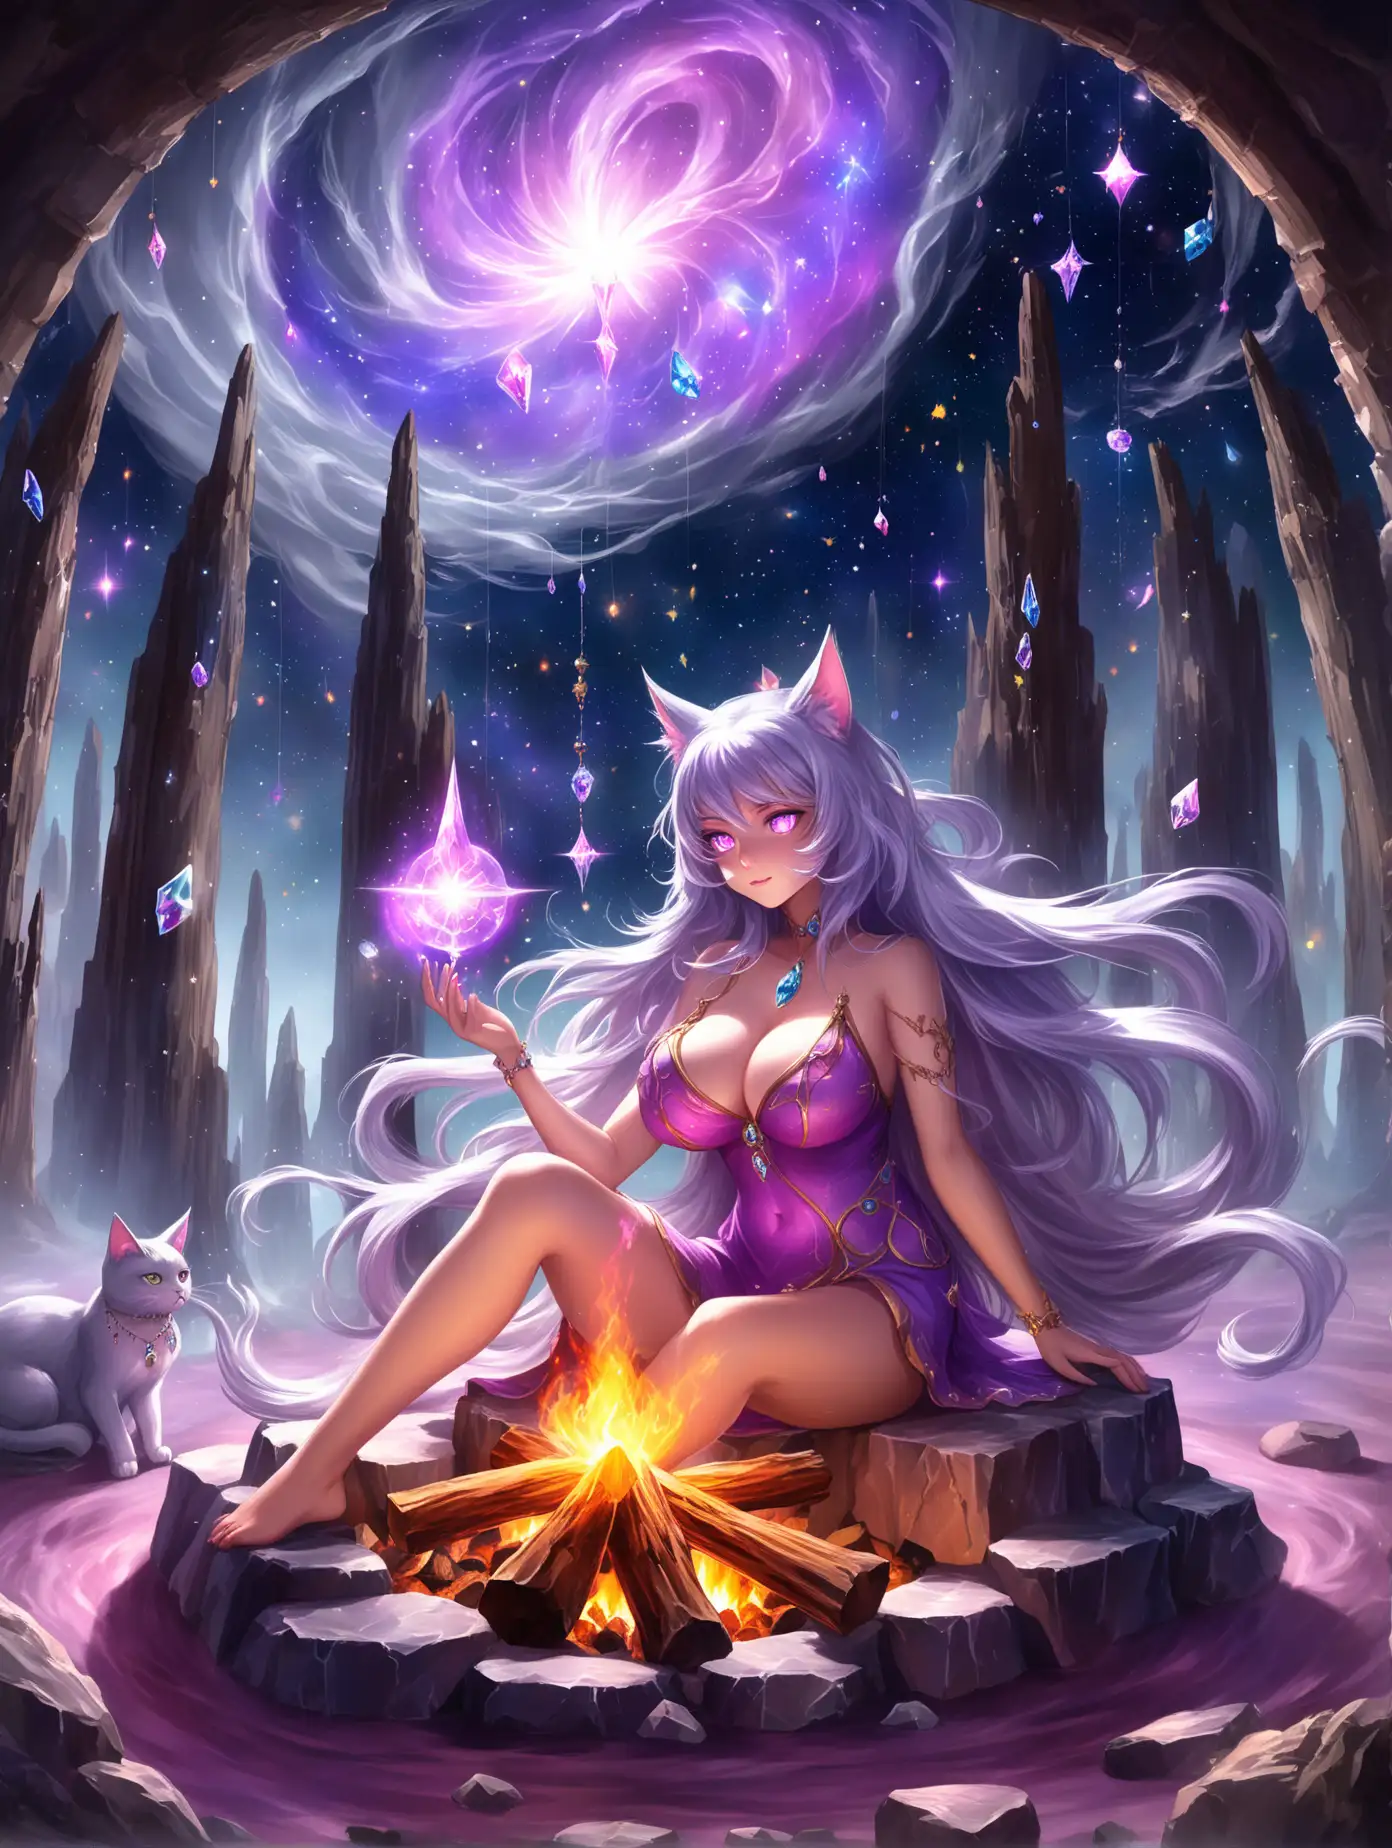 Busty catgirl sitting at a campfire. Stars and darkness surround her.  Long silveryhair flows out alongthe wind andmingles with the smoke,  a purple nebula burns away from the rising smoke. She has pink pupils reflected in the light, her pendulus breasts gently sway with the music.  Magical notes float in the air bejeweled with vibrant stones. Each crystal a reflection of a different planet or star across the solarium 